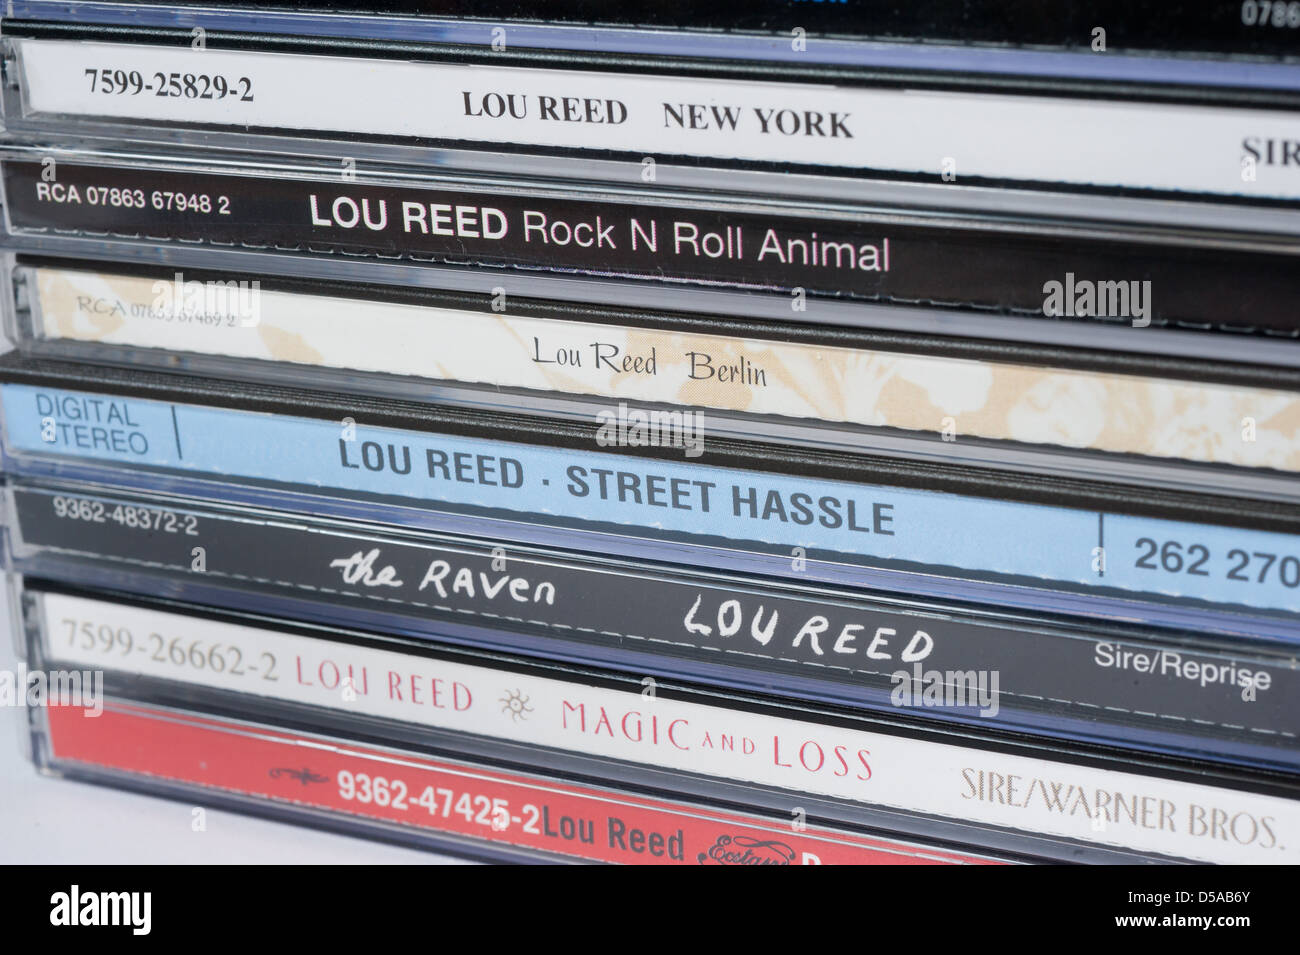 A pile of Lou Reed albums Stock Photo